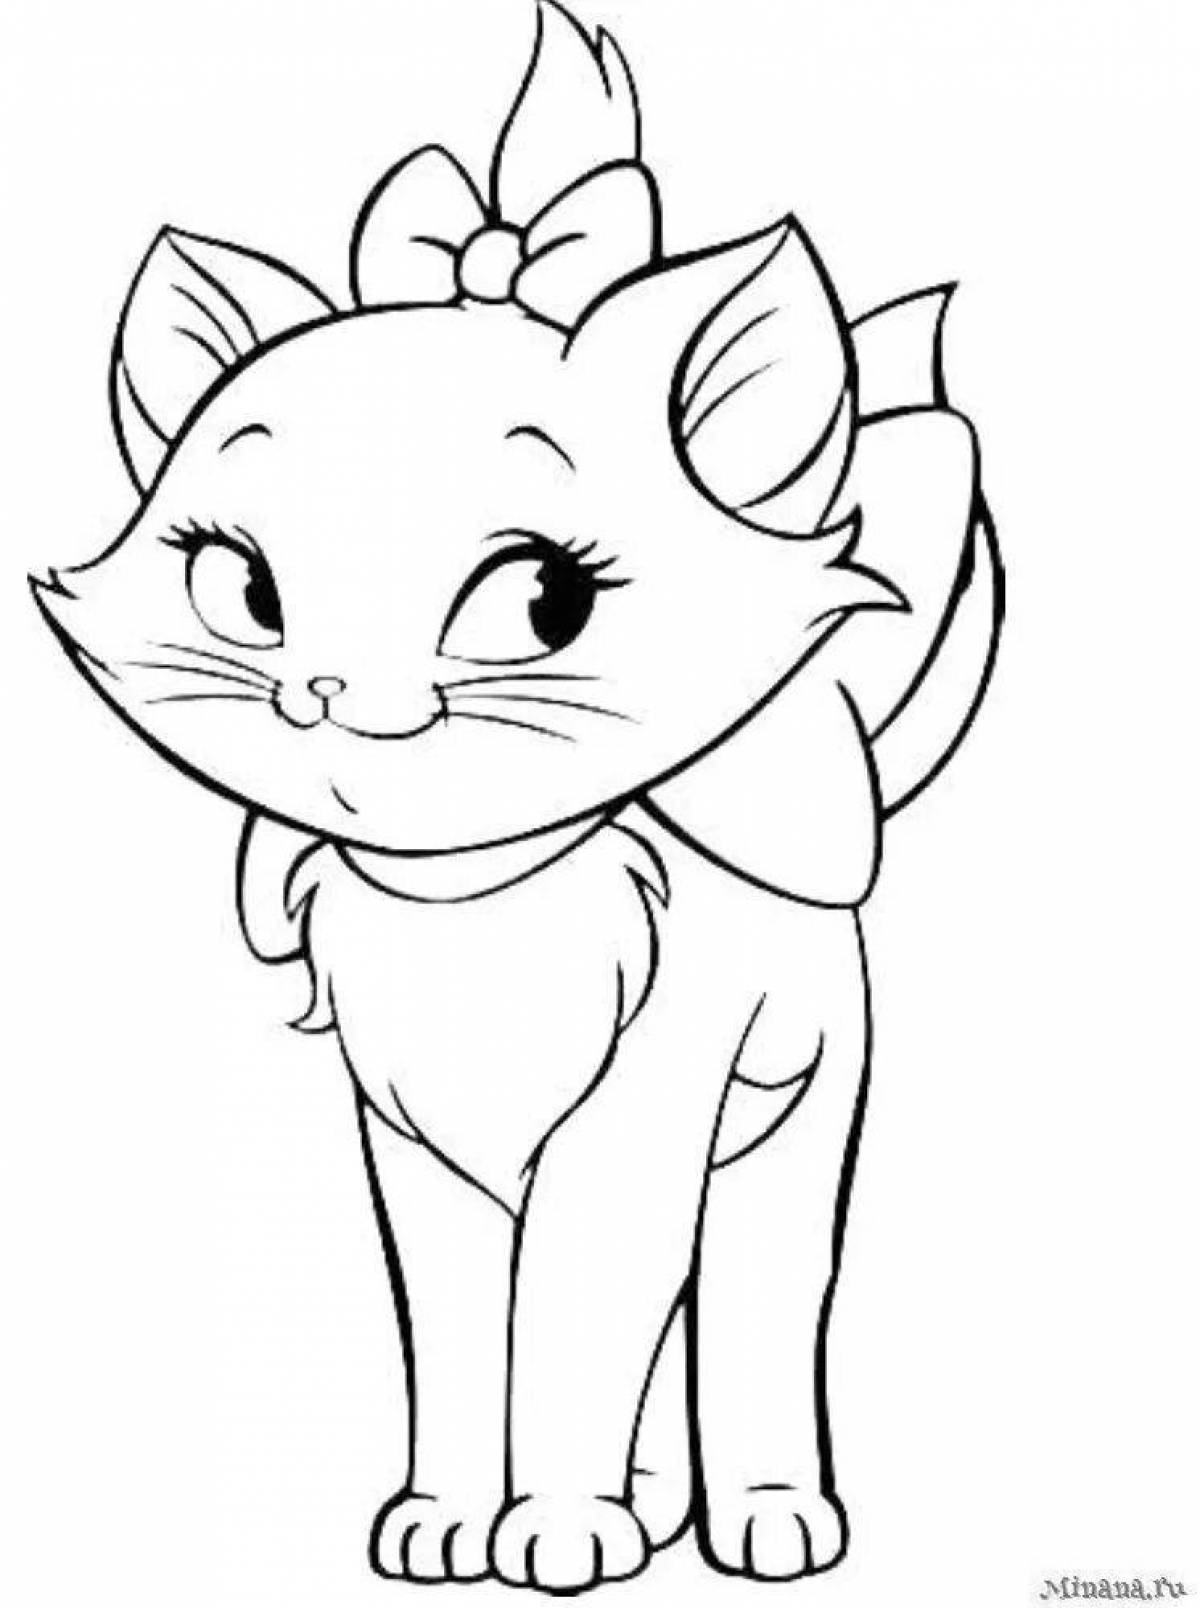 Coloring book happy cat with a bow